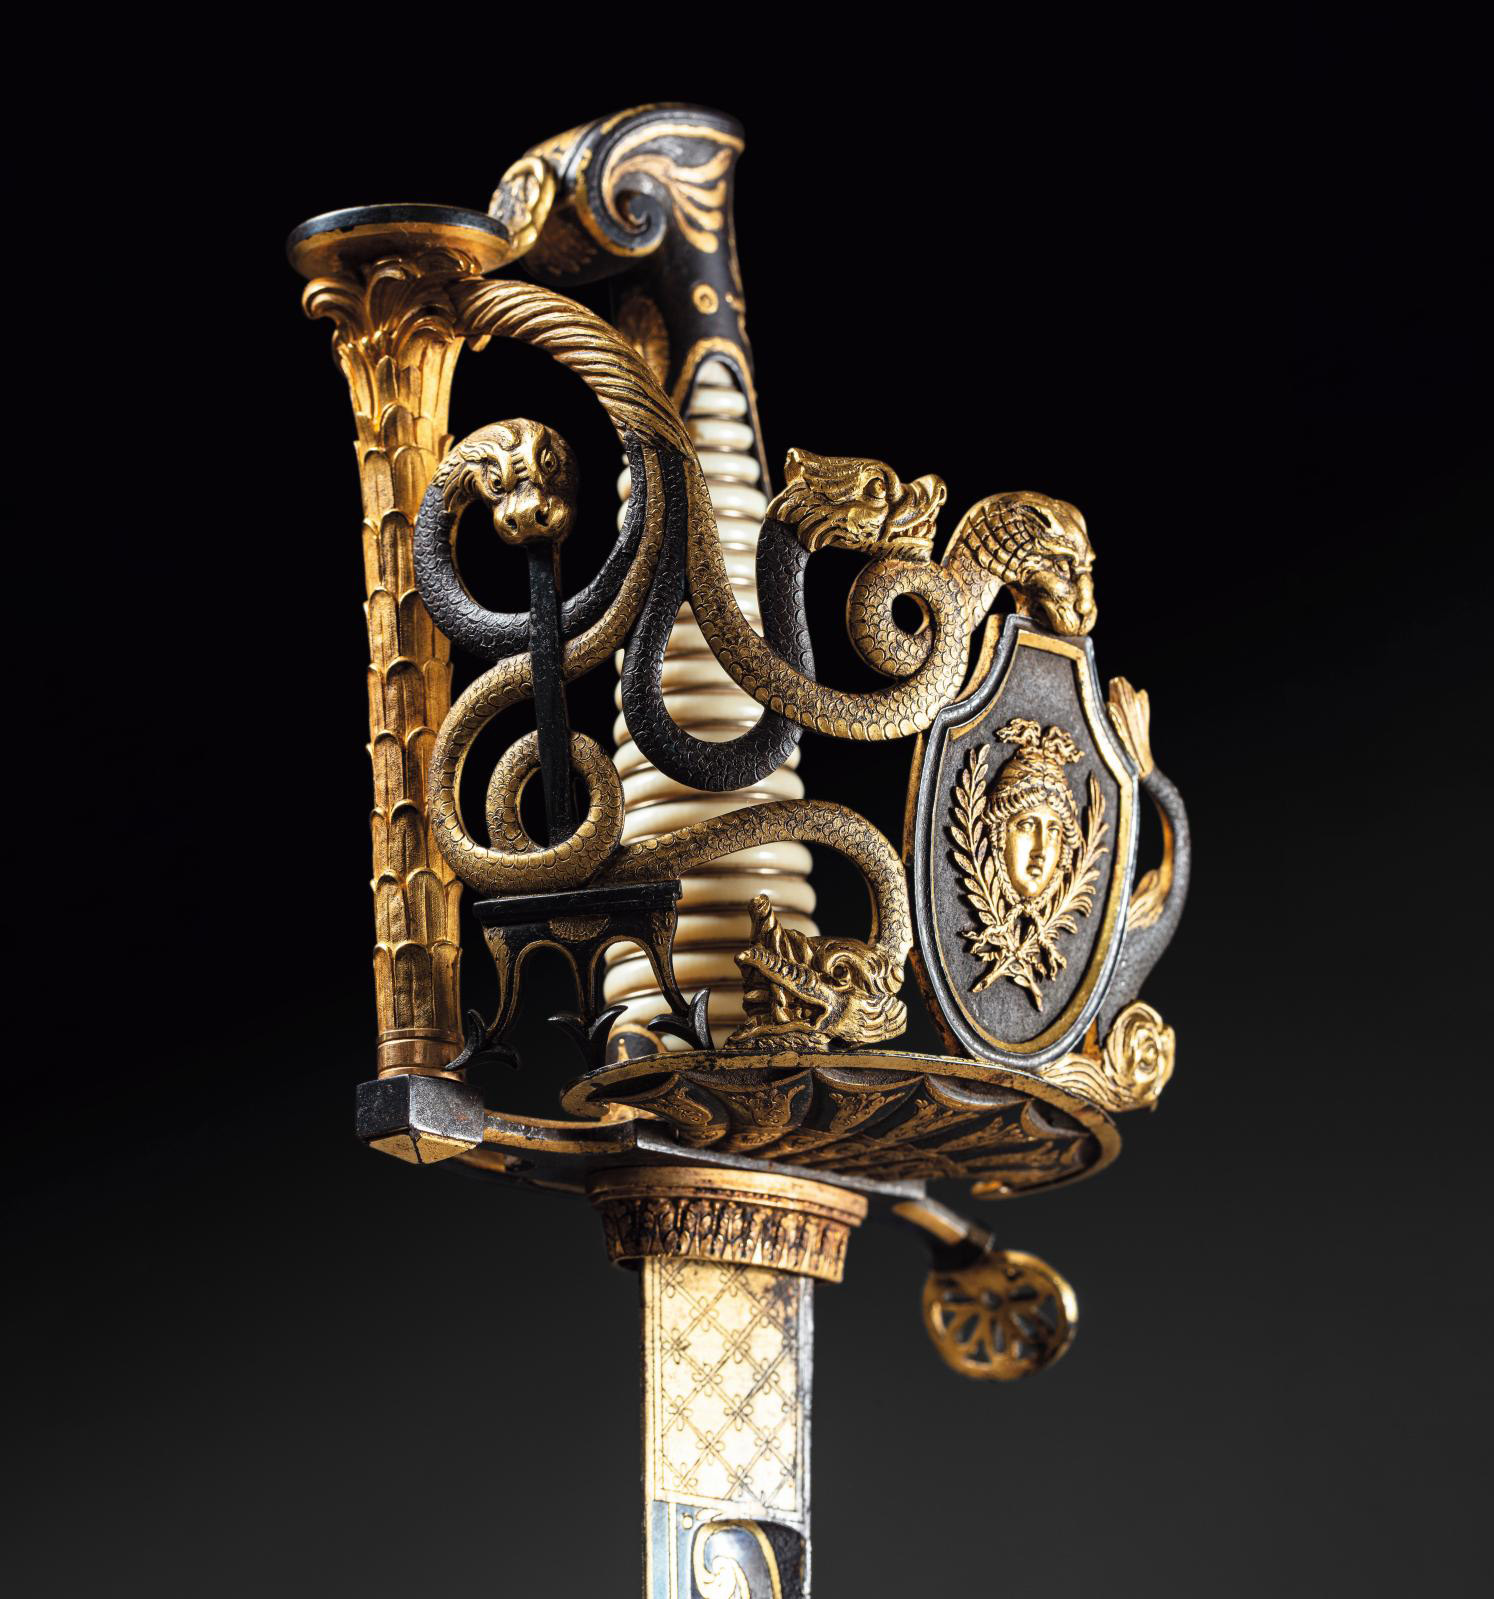 A Saber for Prince Joachim Murat, Grand Admiral of the Empire